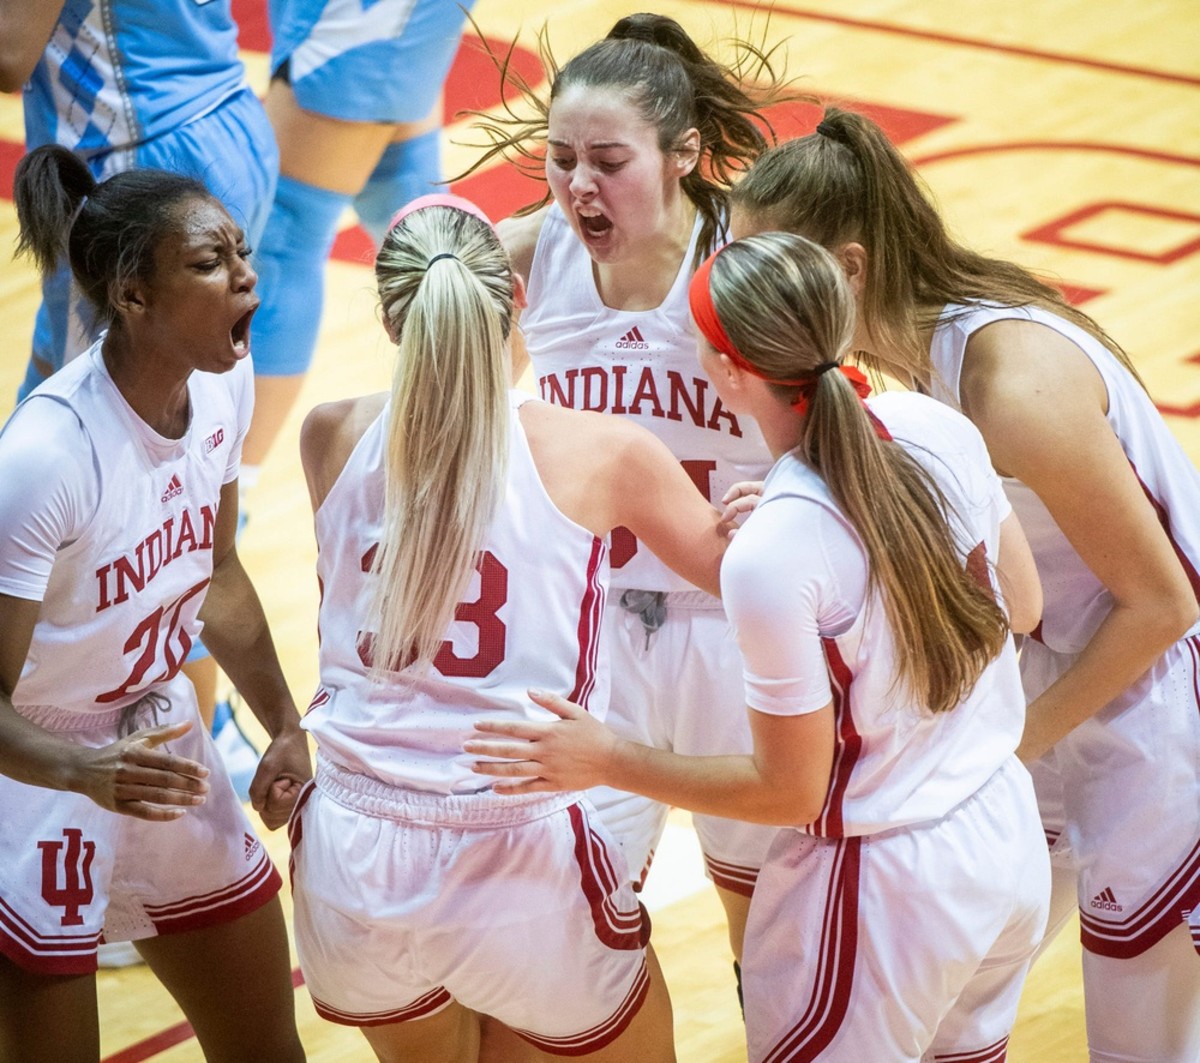 Indiana's Chloe Moore-McNeil (22), Mackenzie Holmes (54) Yarden Garzon (12) and Sara Scalia (14) celebrate with Sydney Parrish (33) after she scored and is fouled by North Carolina's Destiny Adams (20) during the second half of the Indiana versus North Carolina women's basketball game at Simon Skjodt Assembly Hall on Thursday, Dec. 1, 2022.